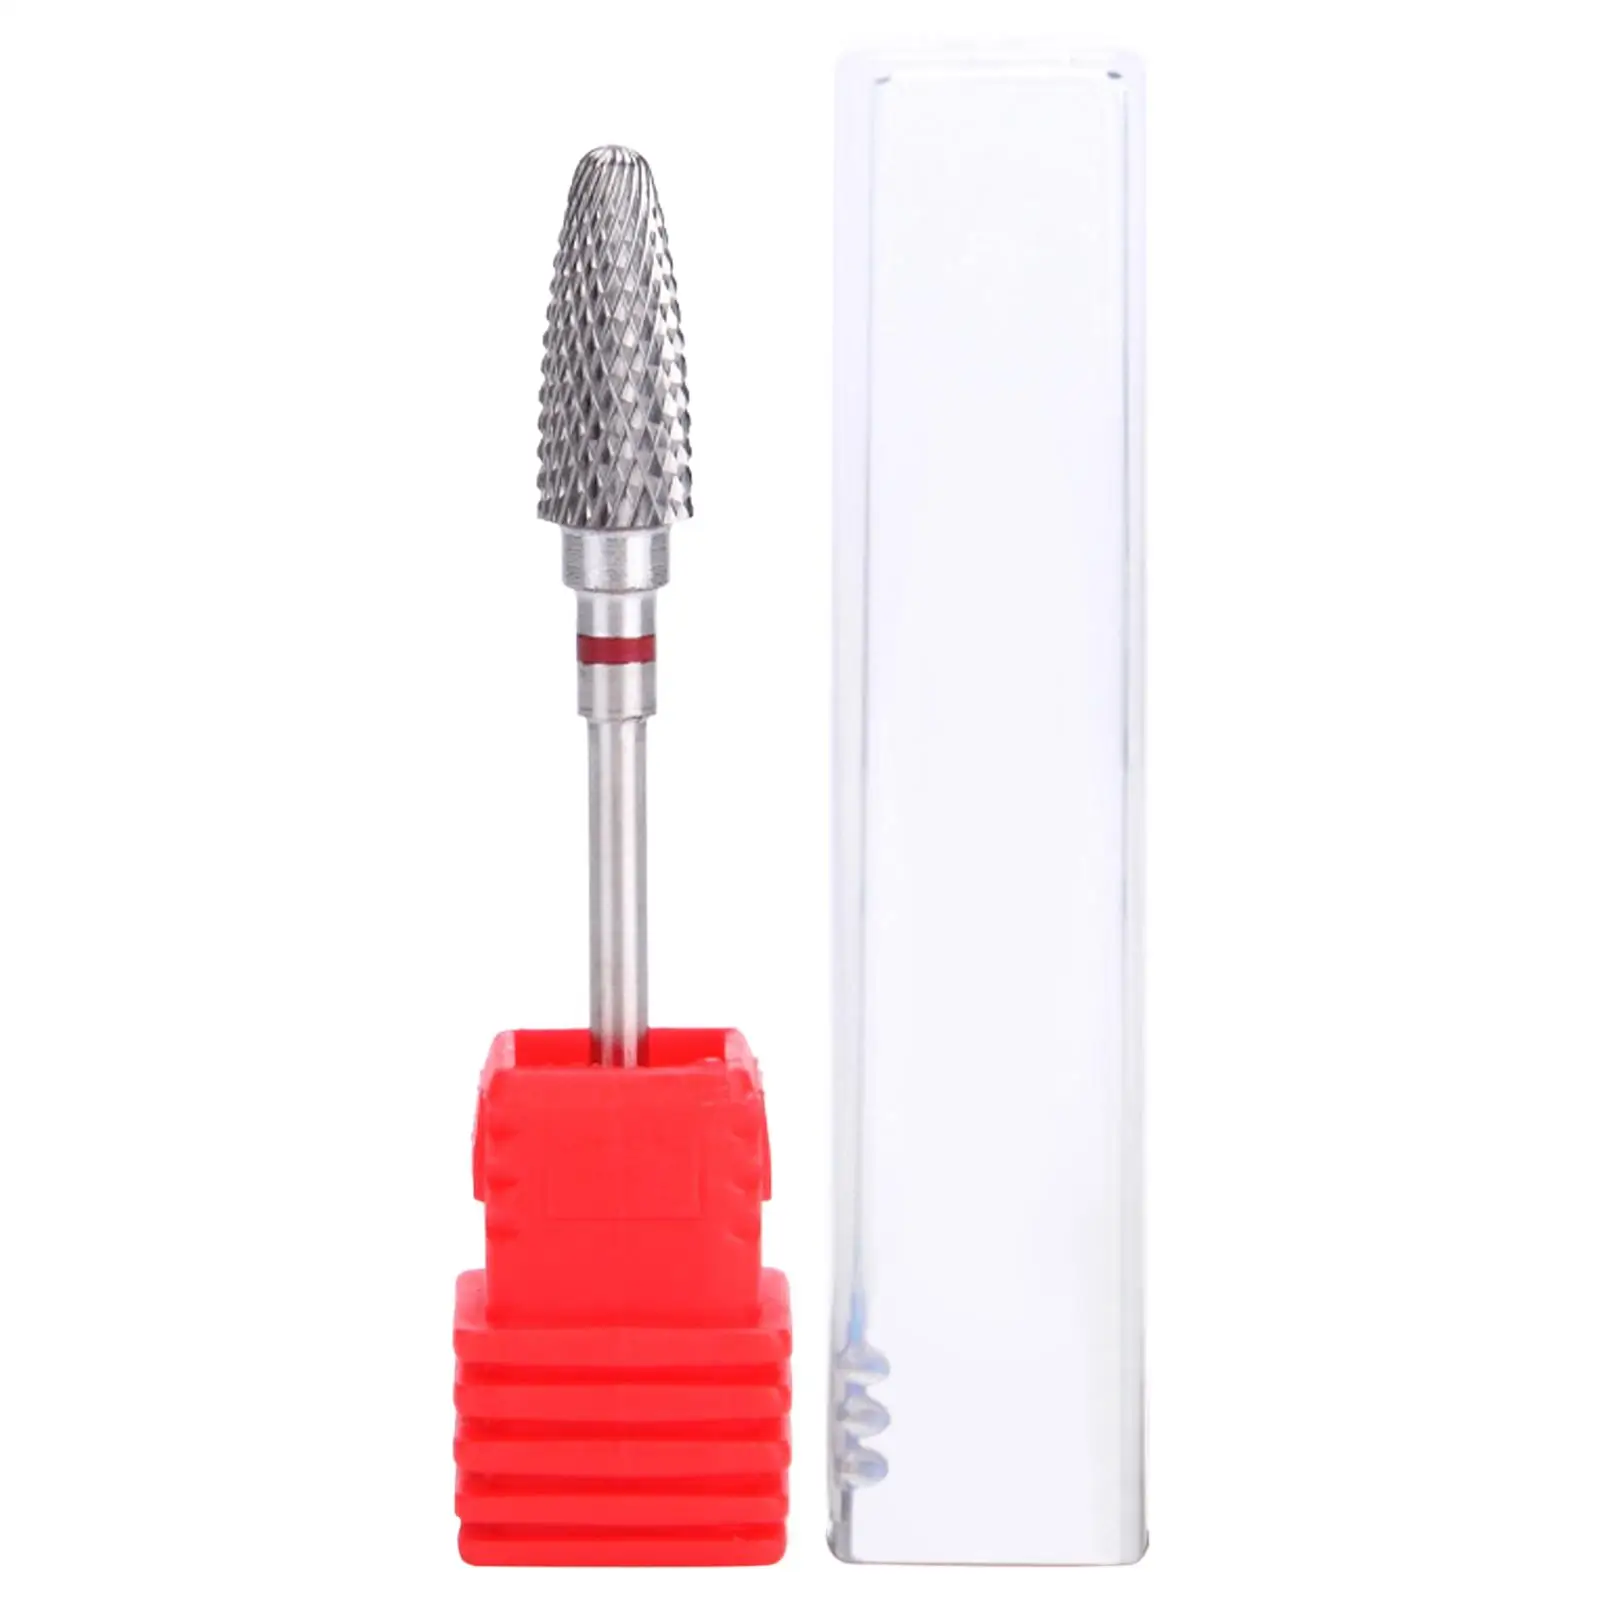 Rotary Nail Drill Bit Manicure Grinding Head Durable for Electric Pedicure Manicure Tool Easy to Use Sturdy Easy to Install